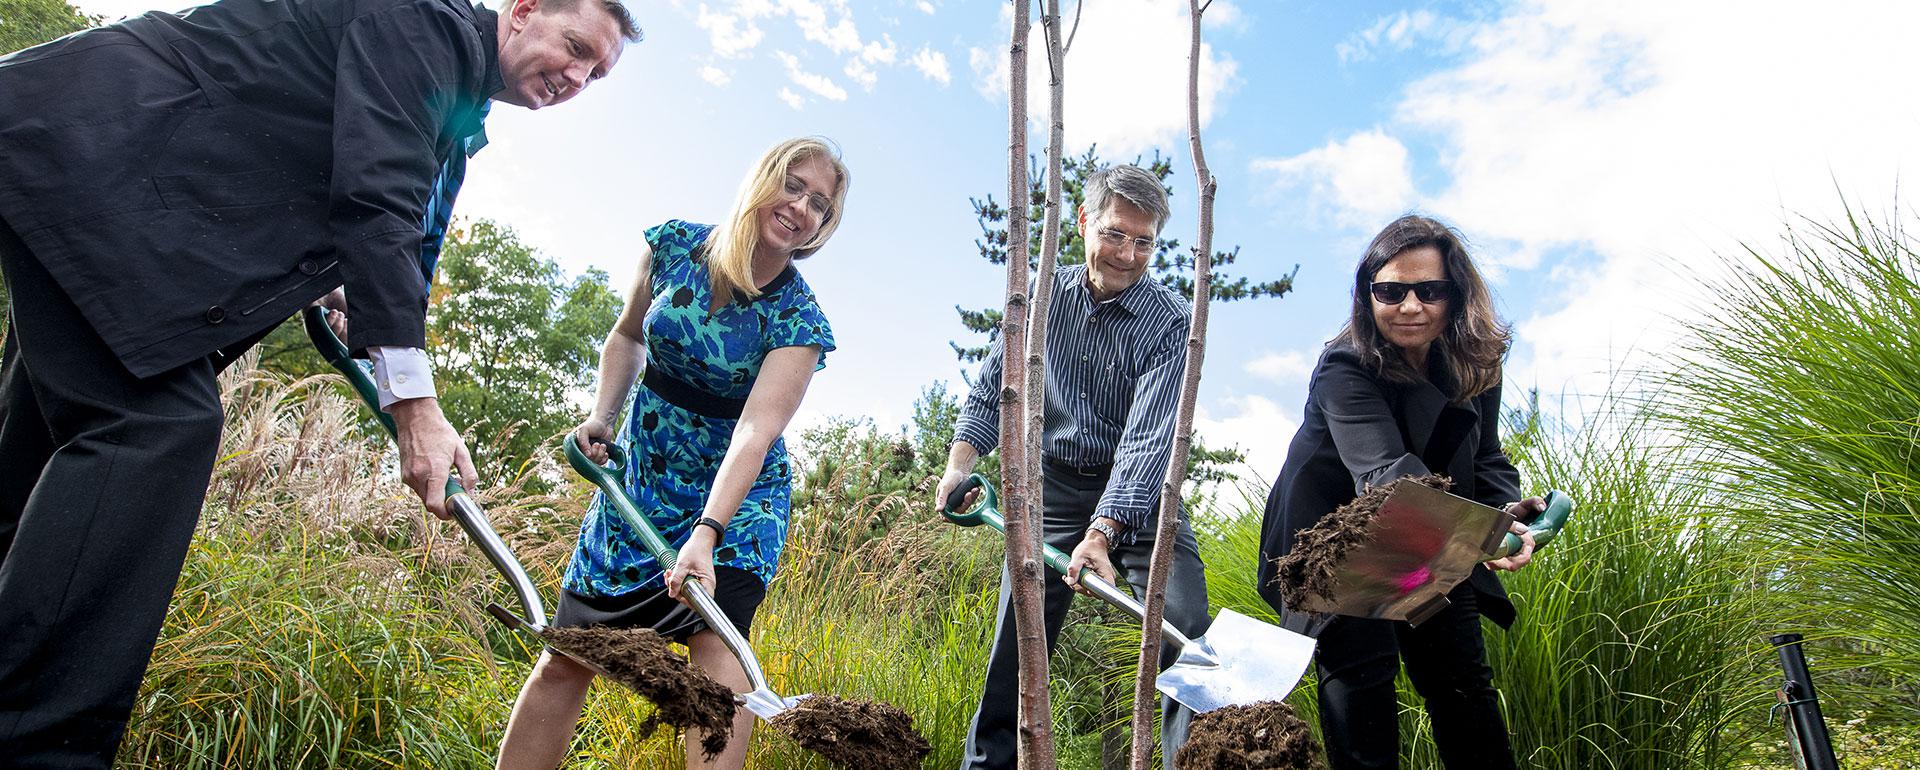 2 women and two men with shovels placing soil over a freshly planted tree